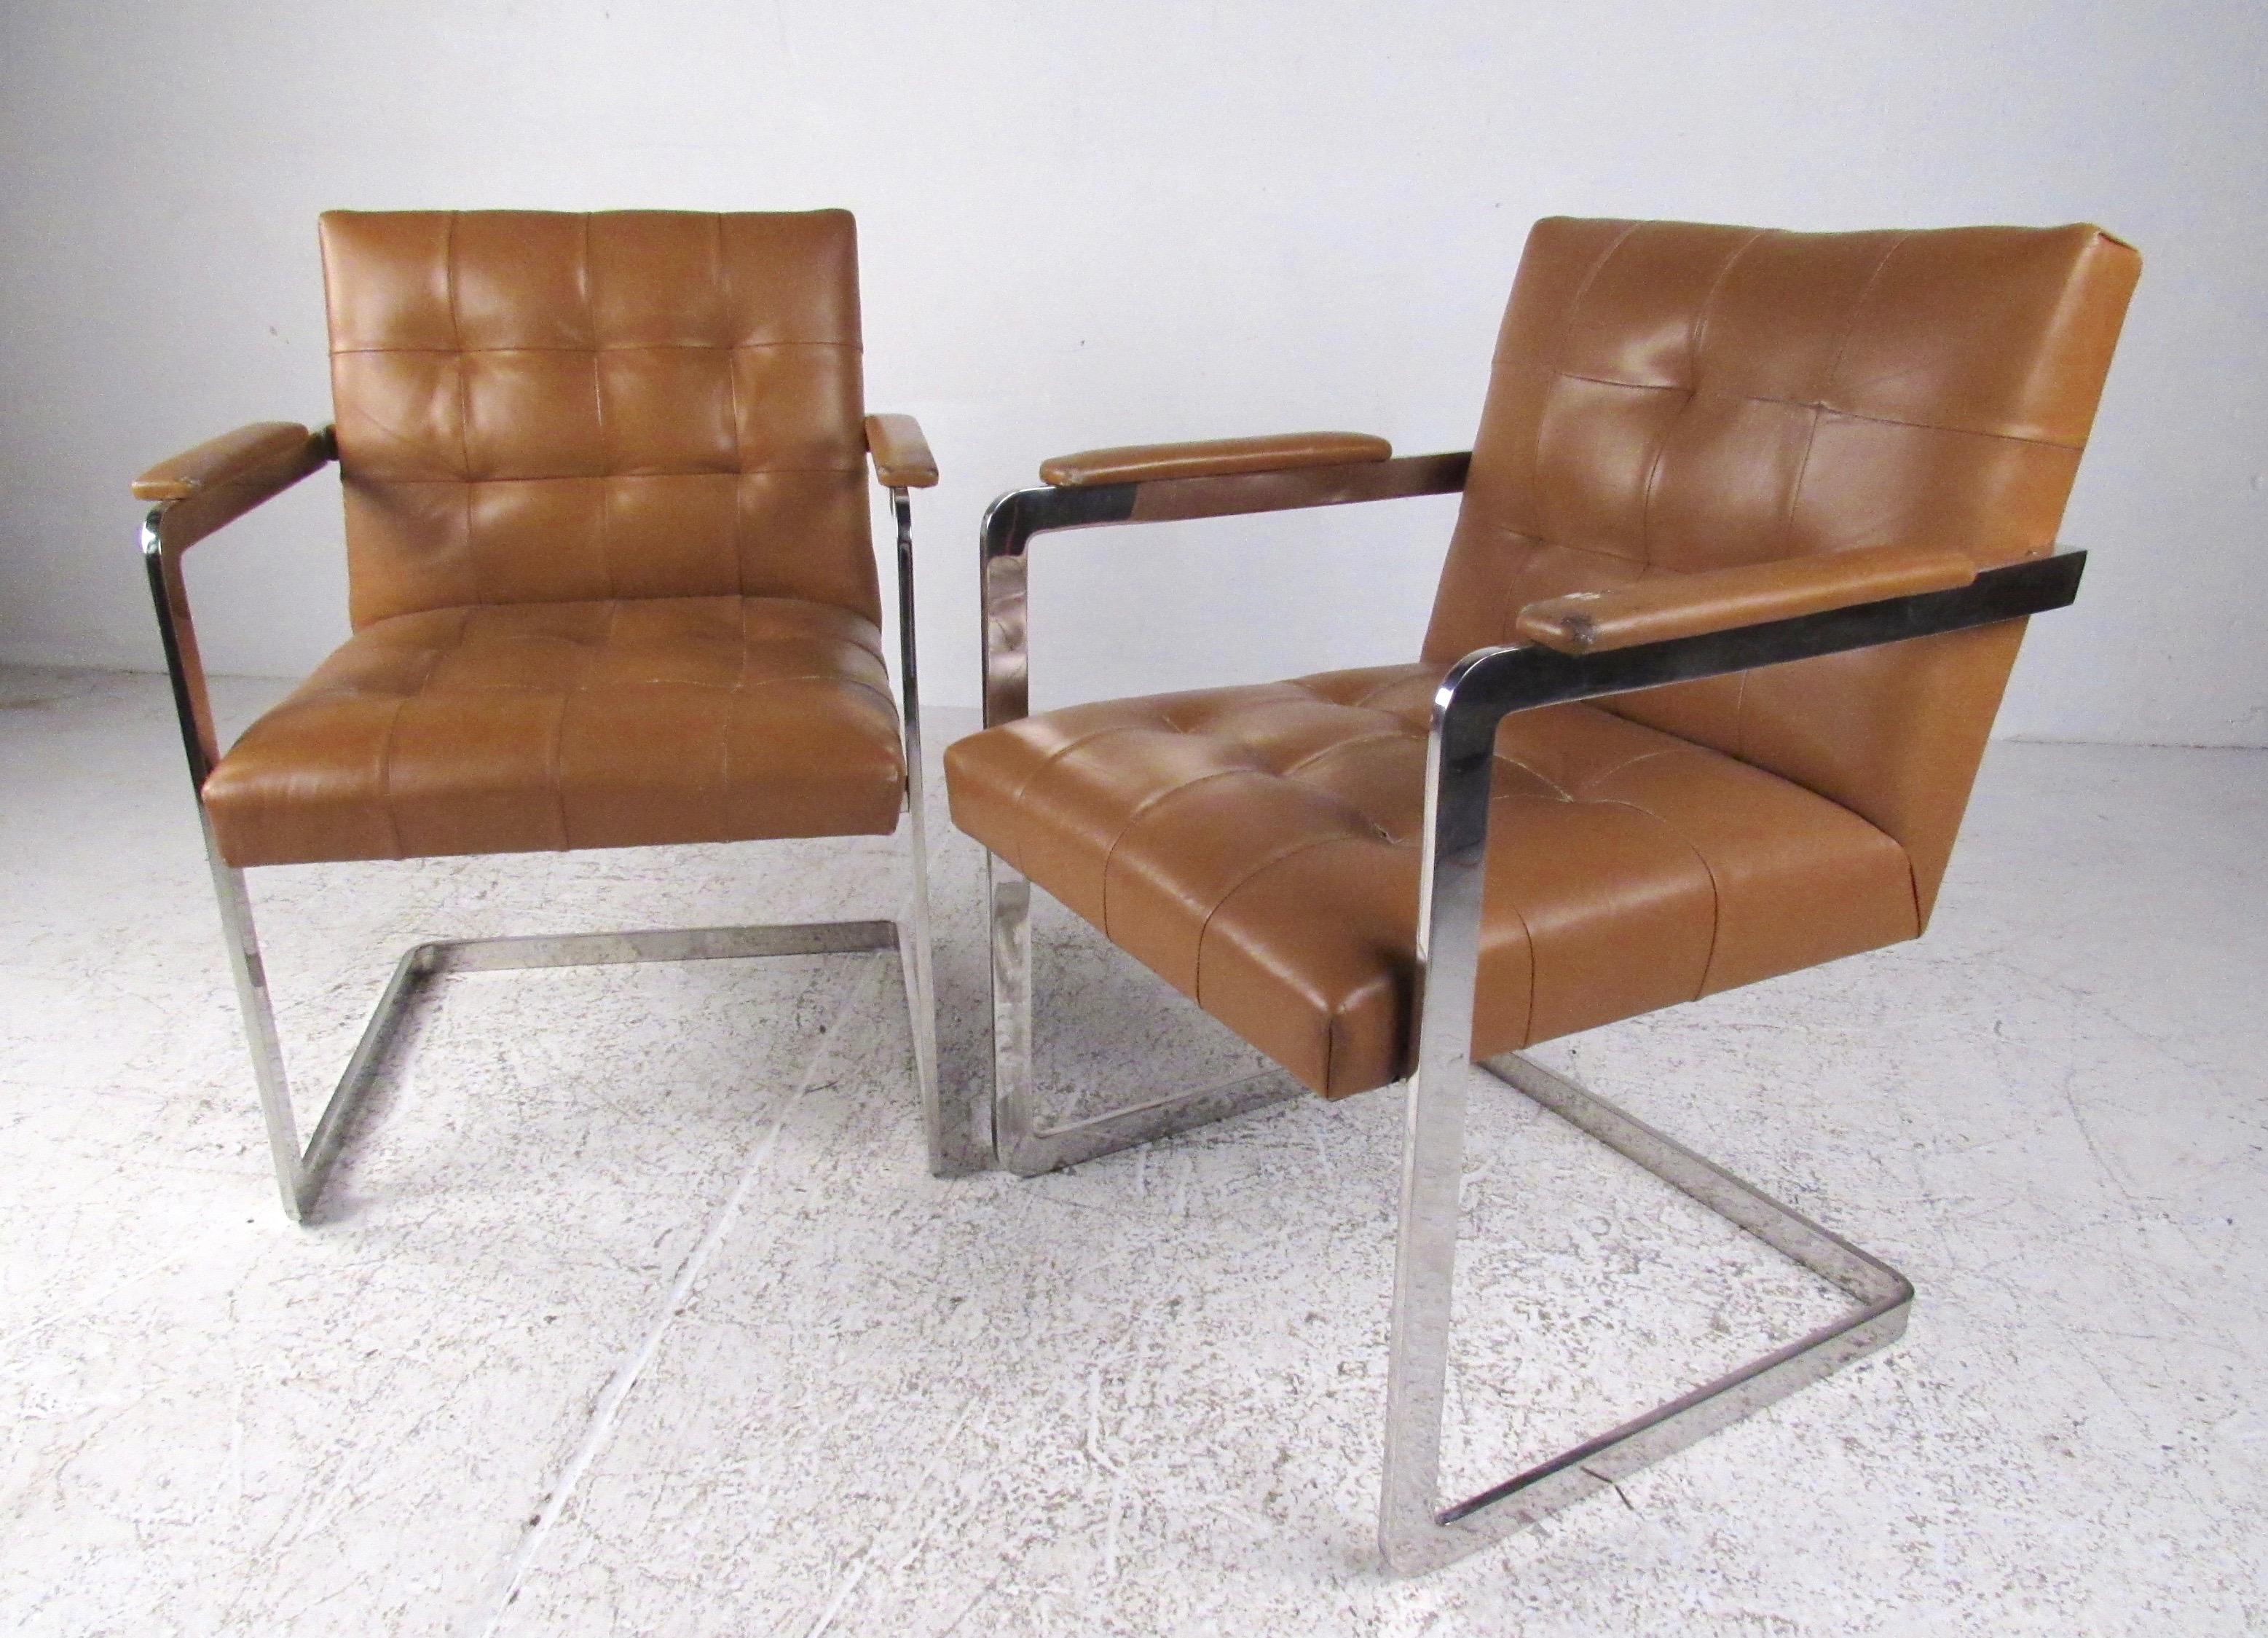 This stylish pair of vintage modern arm chairs feature tufted leather seats and heavy flat chrome frames. Midcentury appeal in the style of Milo Baughman adds striking seating to home or office interiors. Please confirm item location (NY or NJ).